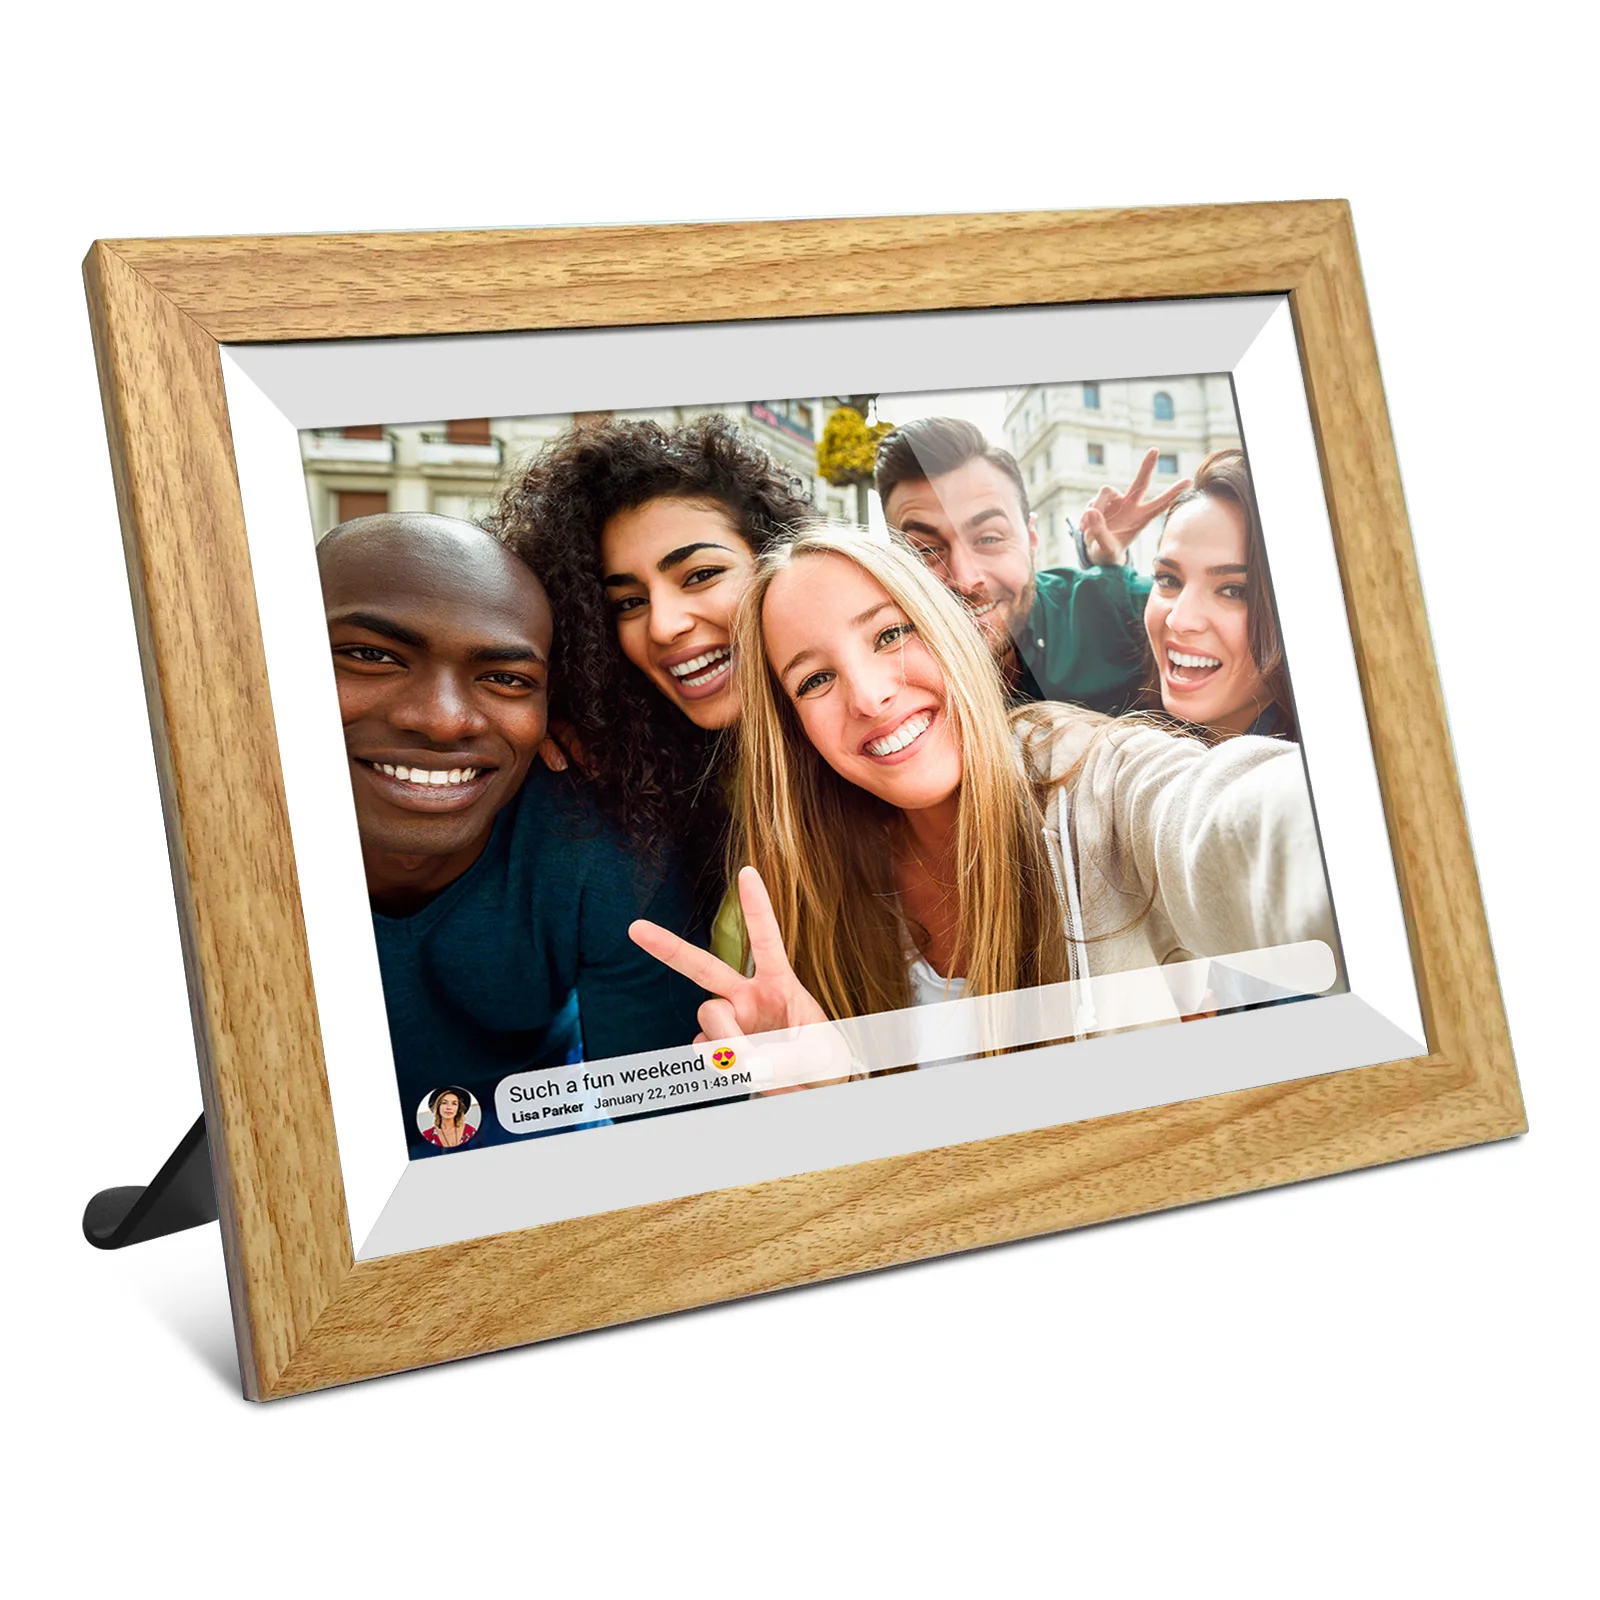 

2021 new product 10 inch Android Wifi Digital Photo Frame Share Important Videos and Photos Via App wifi cloud photo frame